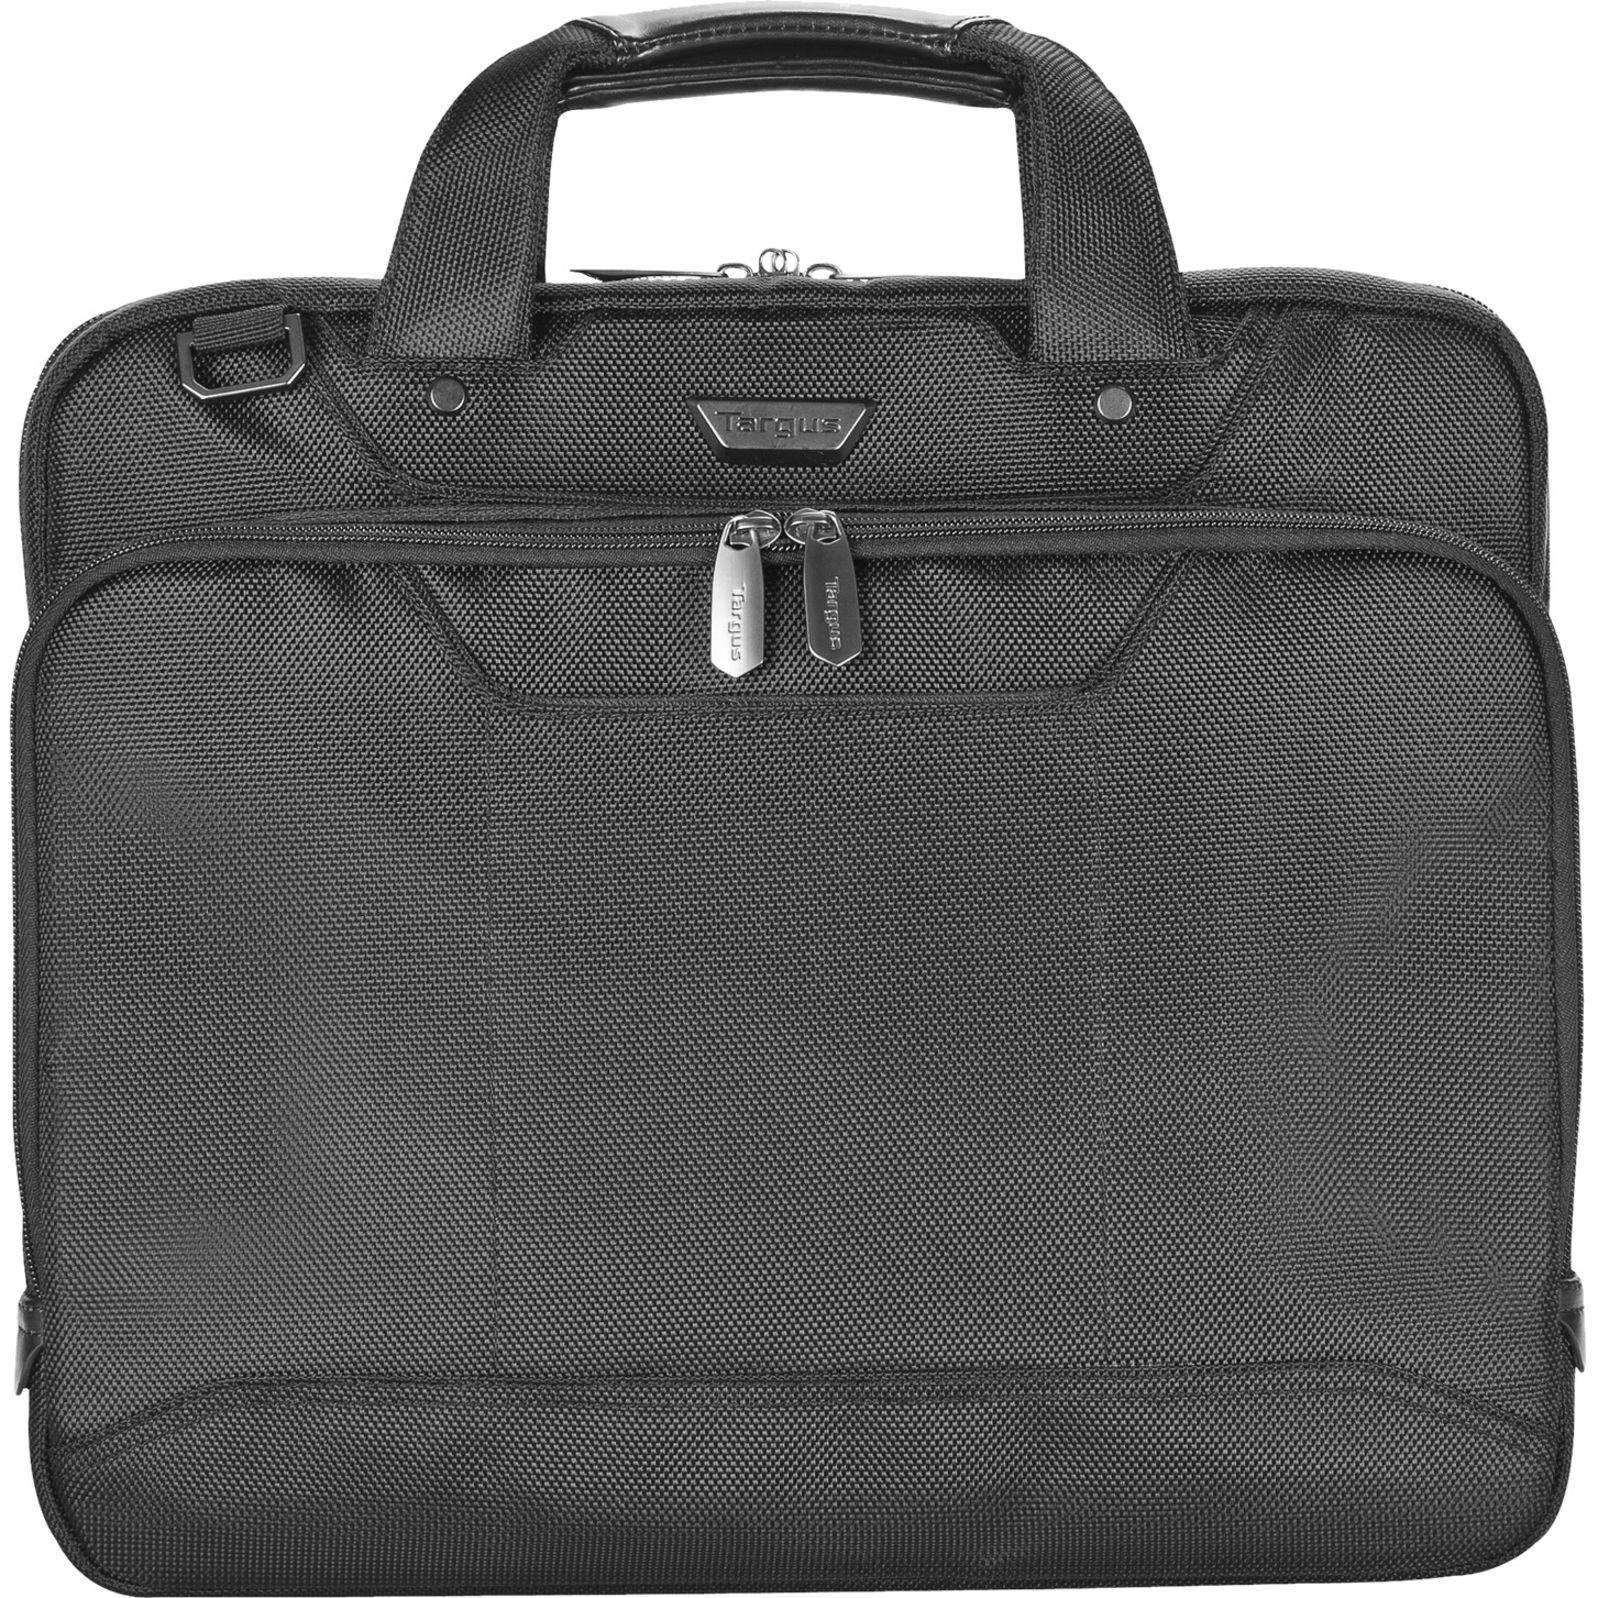 Targus Corporate Traveler CUCT02UT14 Carrying Case for 14" Notebook - image 1 of 3